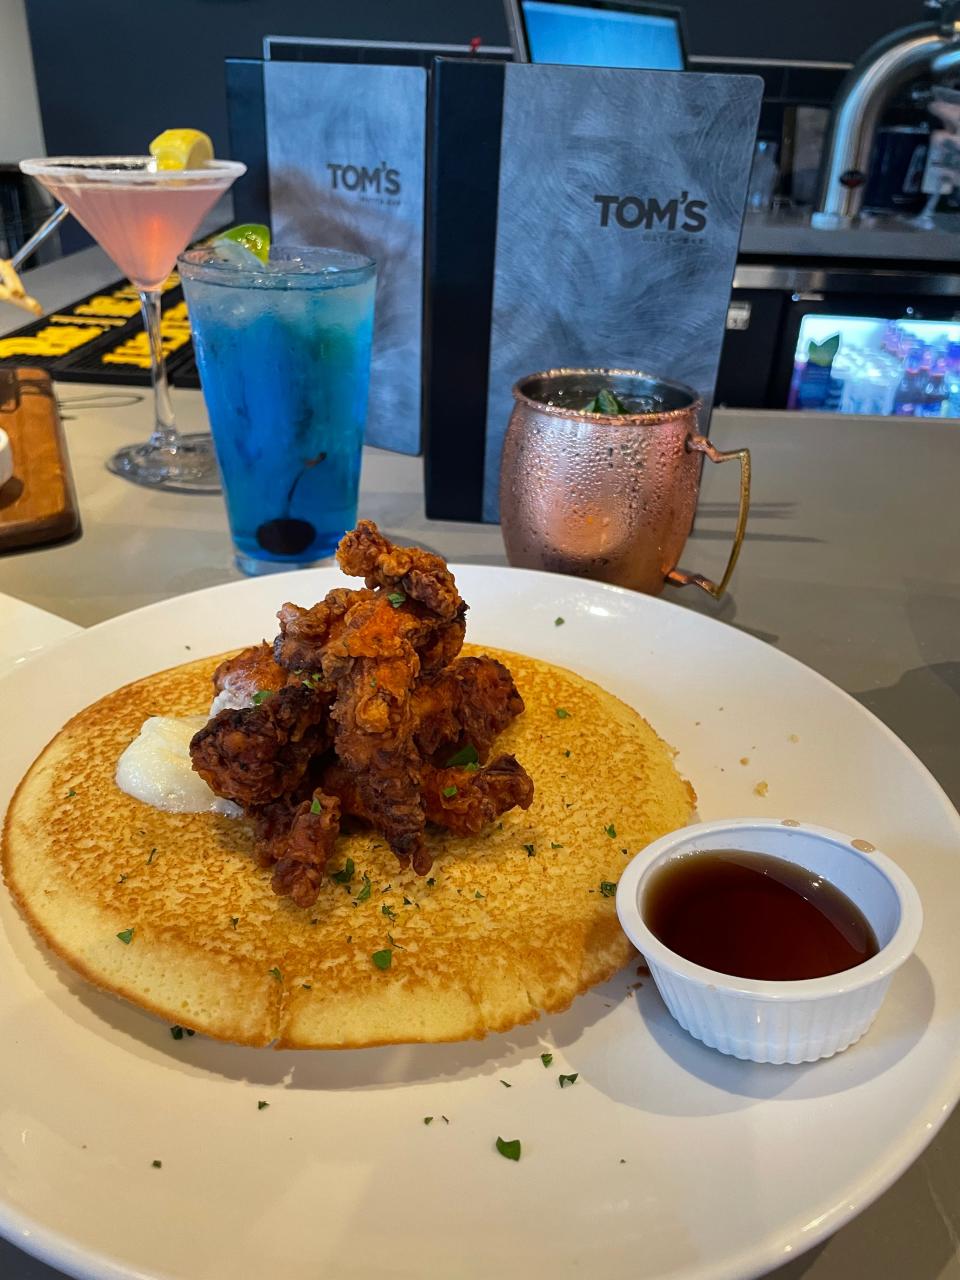 Tom's Crispy Chicken and Cornbread Pancake with pickle brined and hand-battered premium crispy chicken tenders, or tossed in Nashville hot sauce with honey butter and maple syrup.